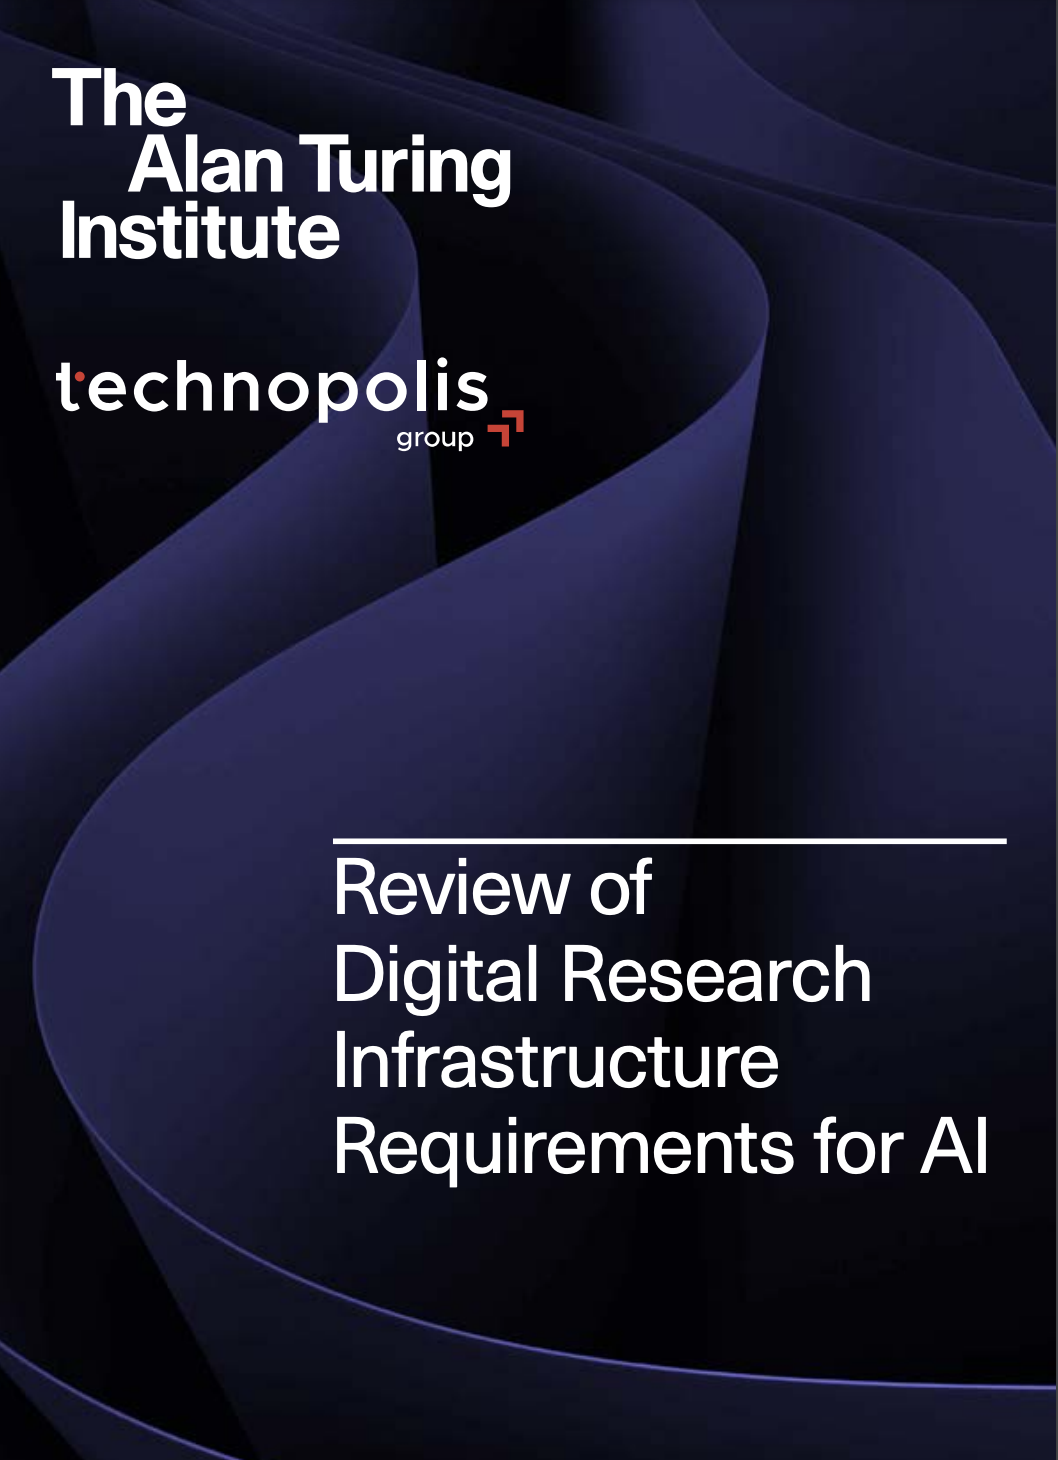 Review of Digital Research Infrastructure for AI